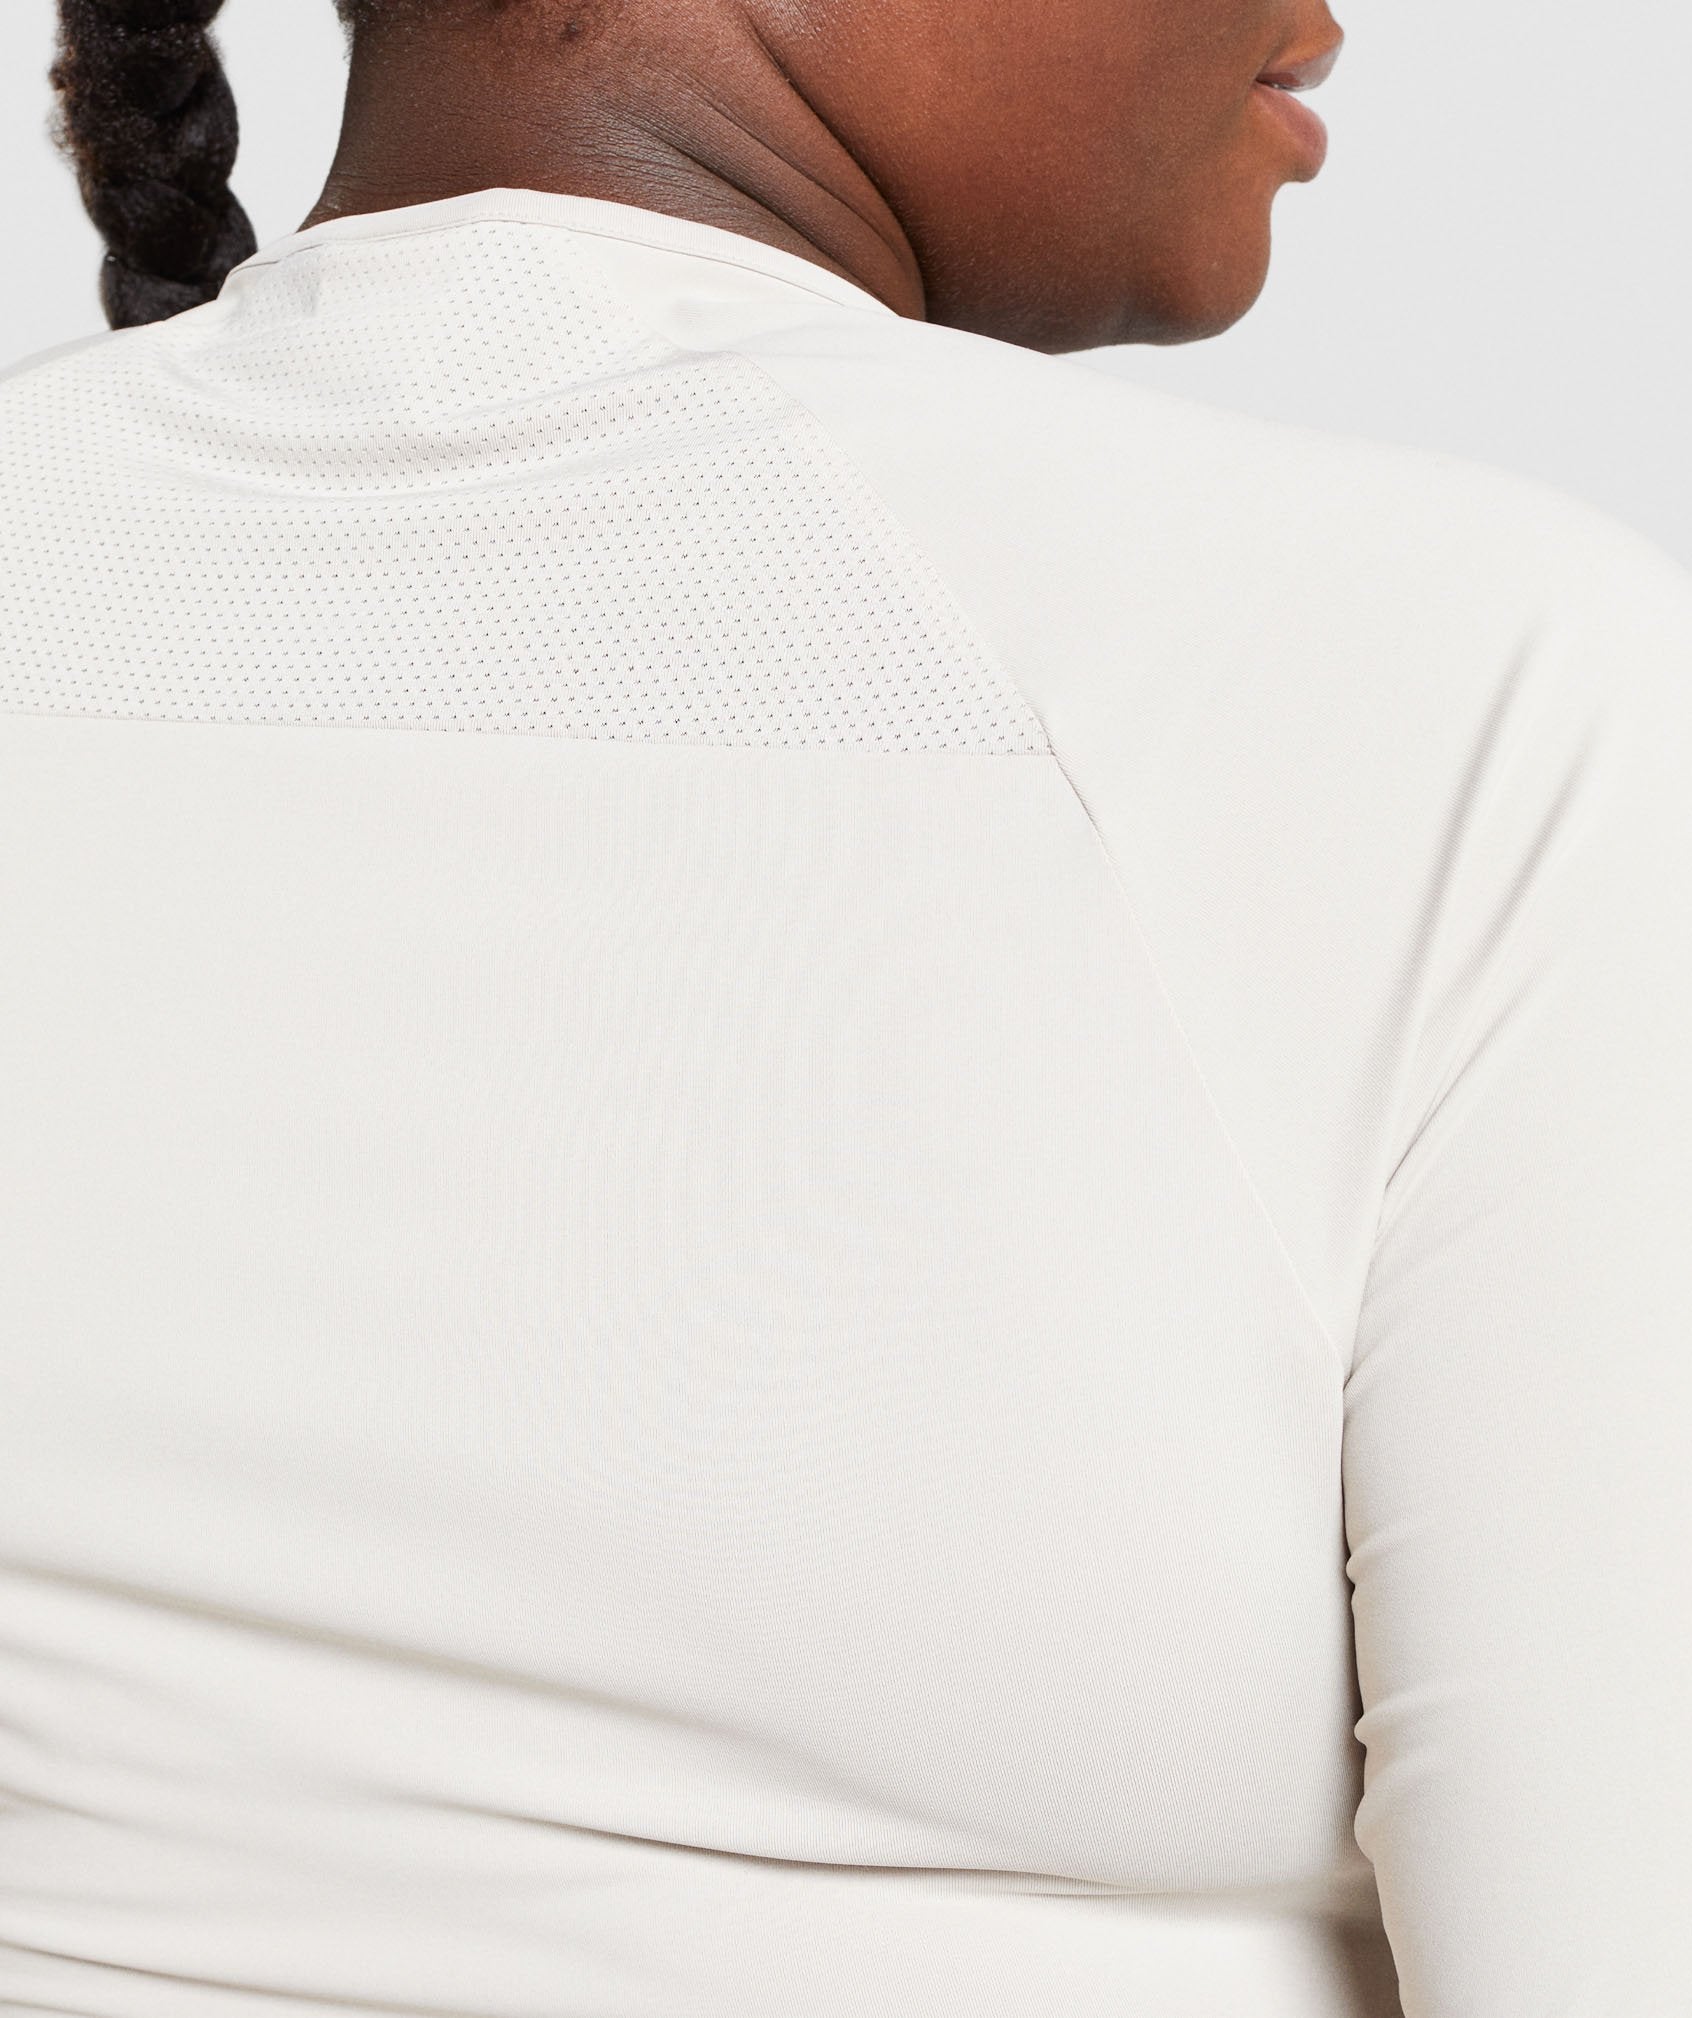 Image D2 shows a close up of back of model wearing Training Long Sleeve Crop Top in Grey